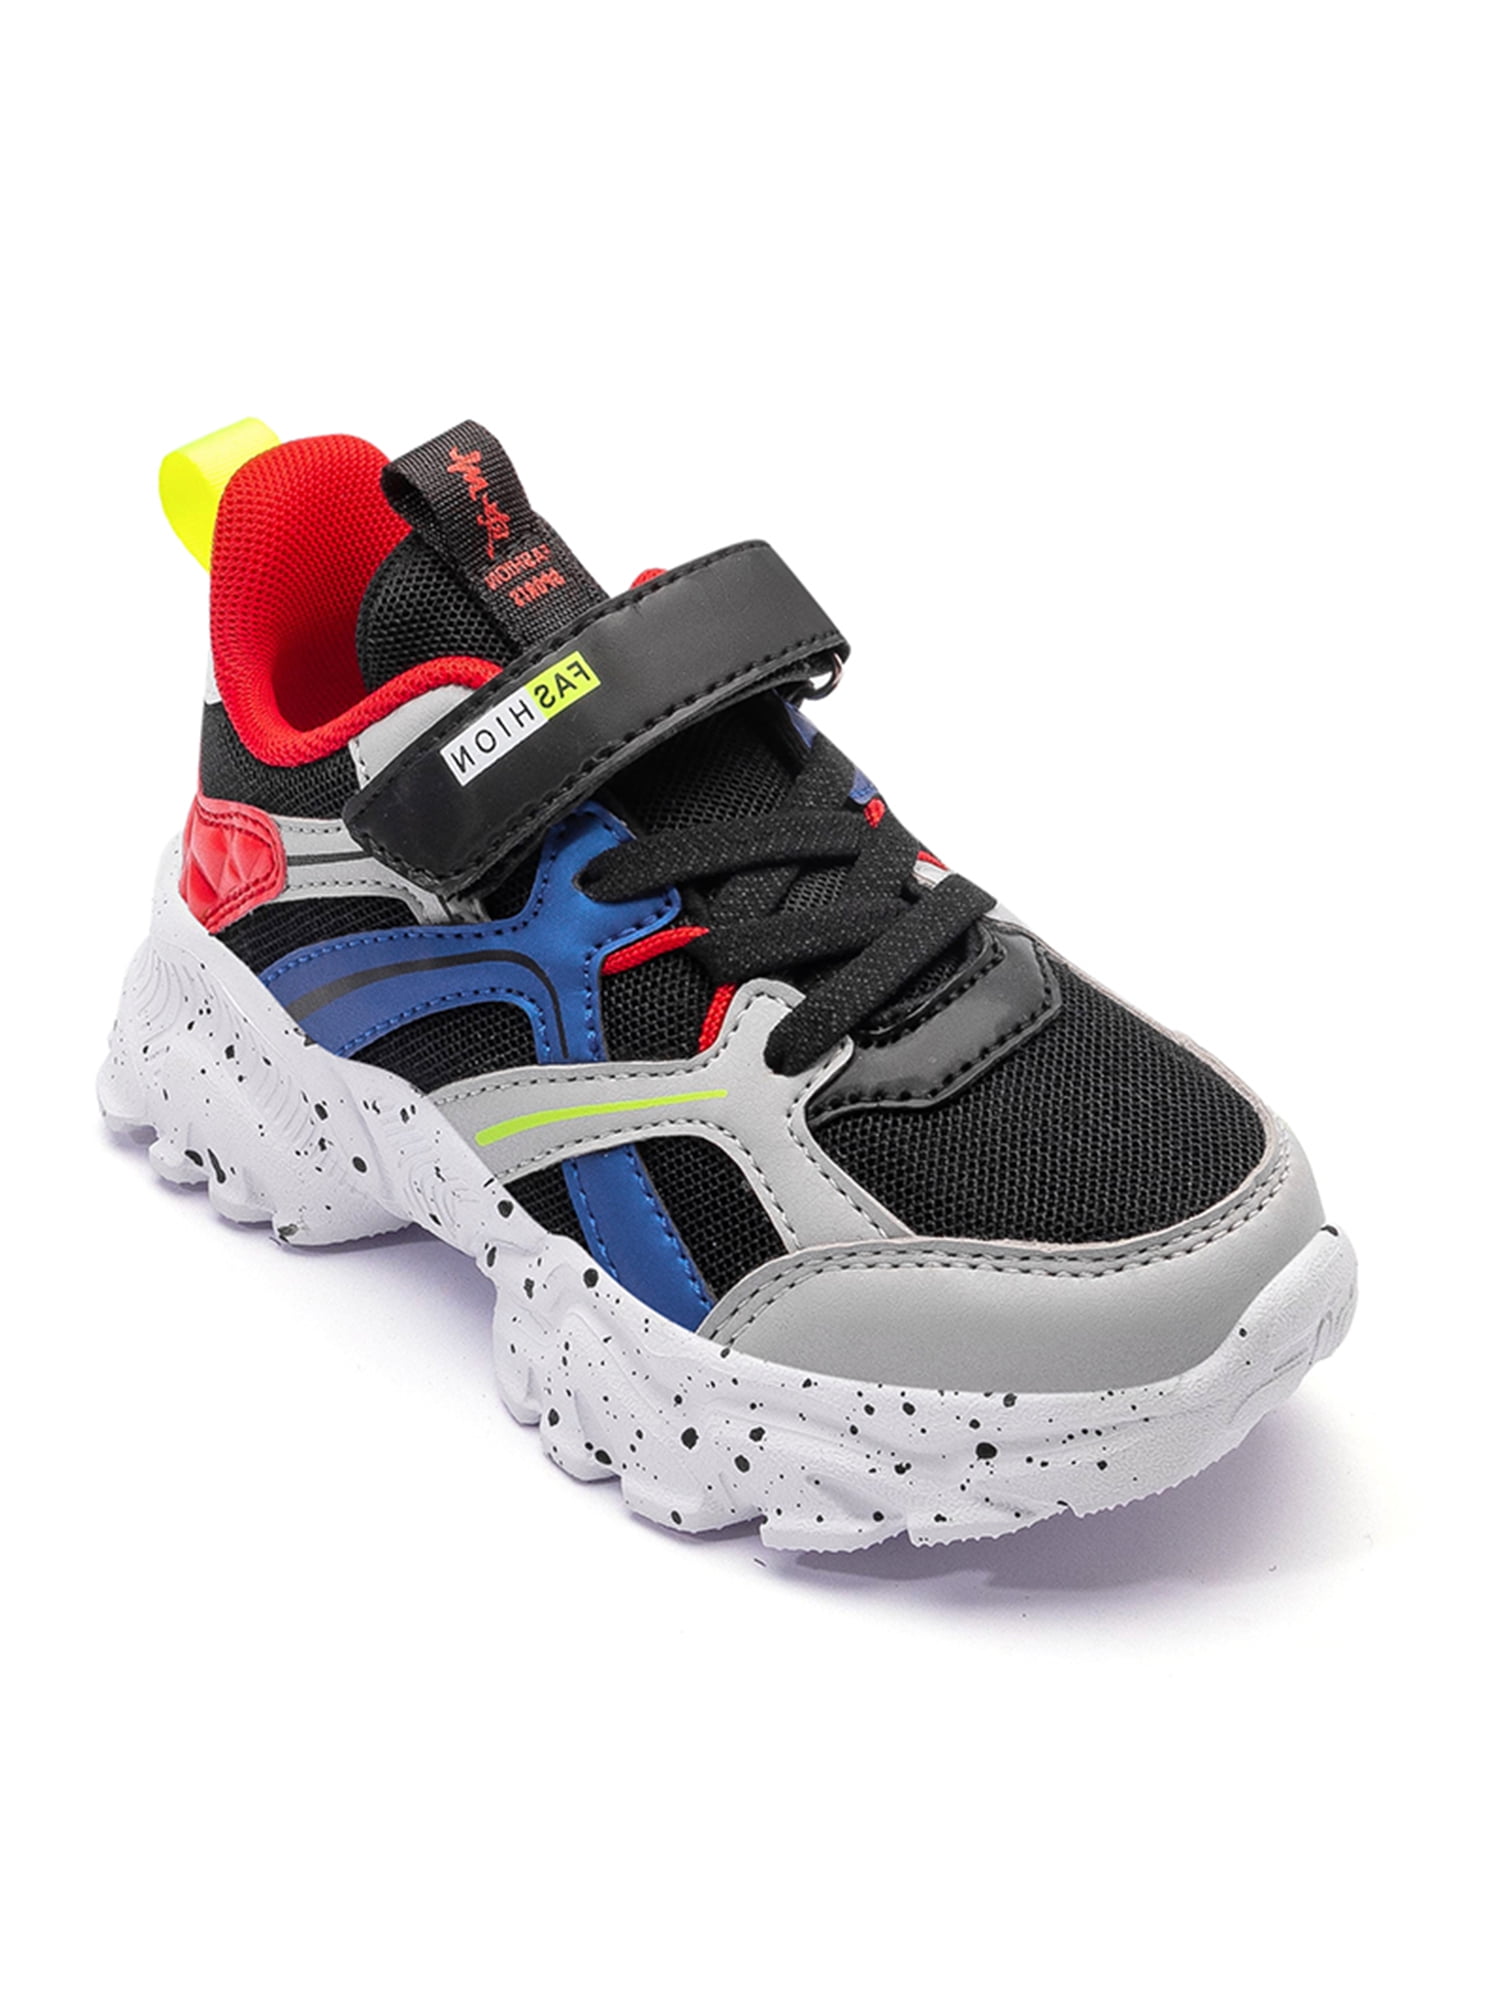 Casual Shoes Unisex-Child for Toddles Soft and Comfortable Yapoly Kids Breathable Sneakers Boys Girls Lightweight Kids Shoes Athletic Easy to Walk Run Sport 